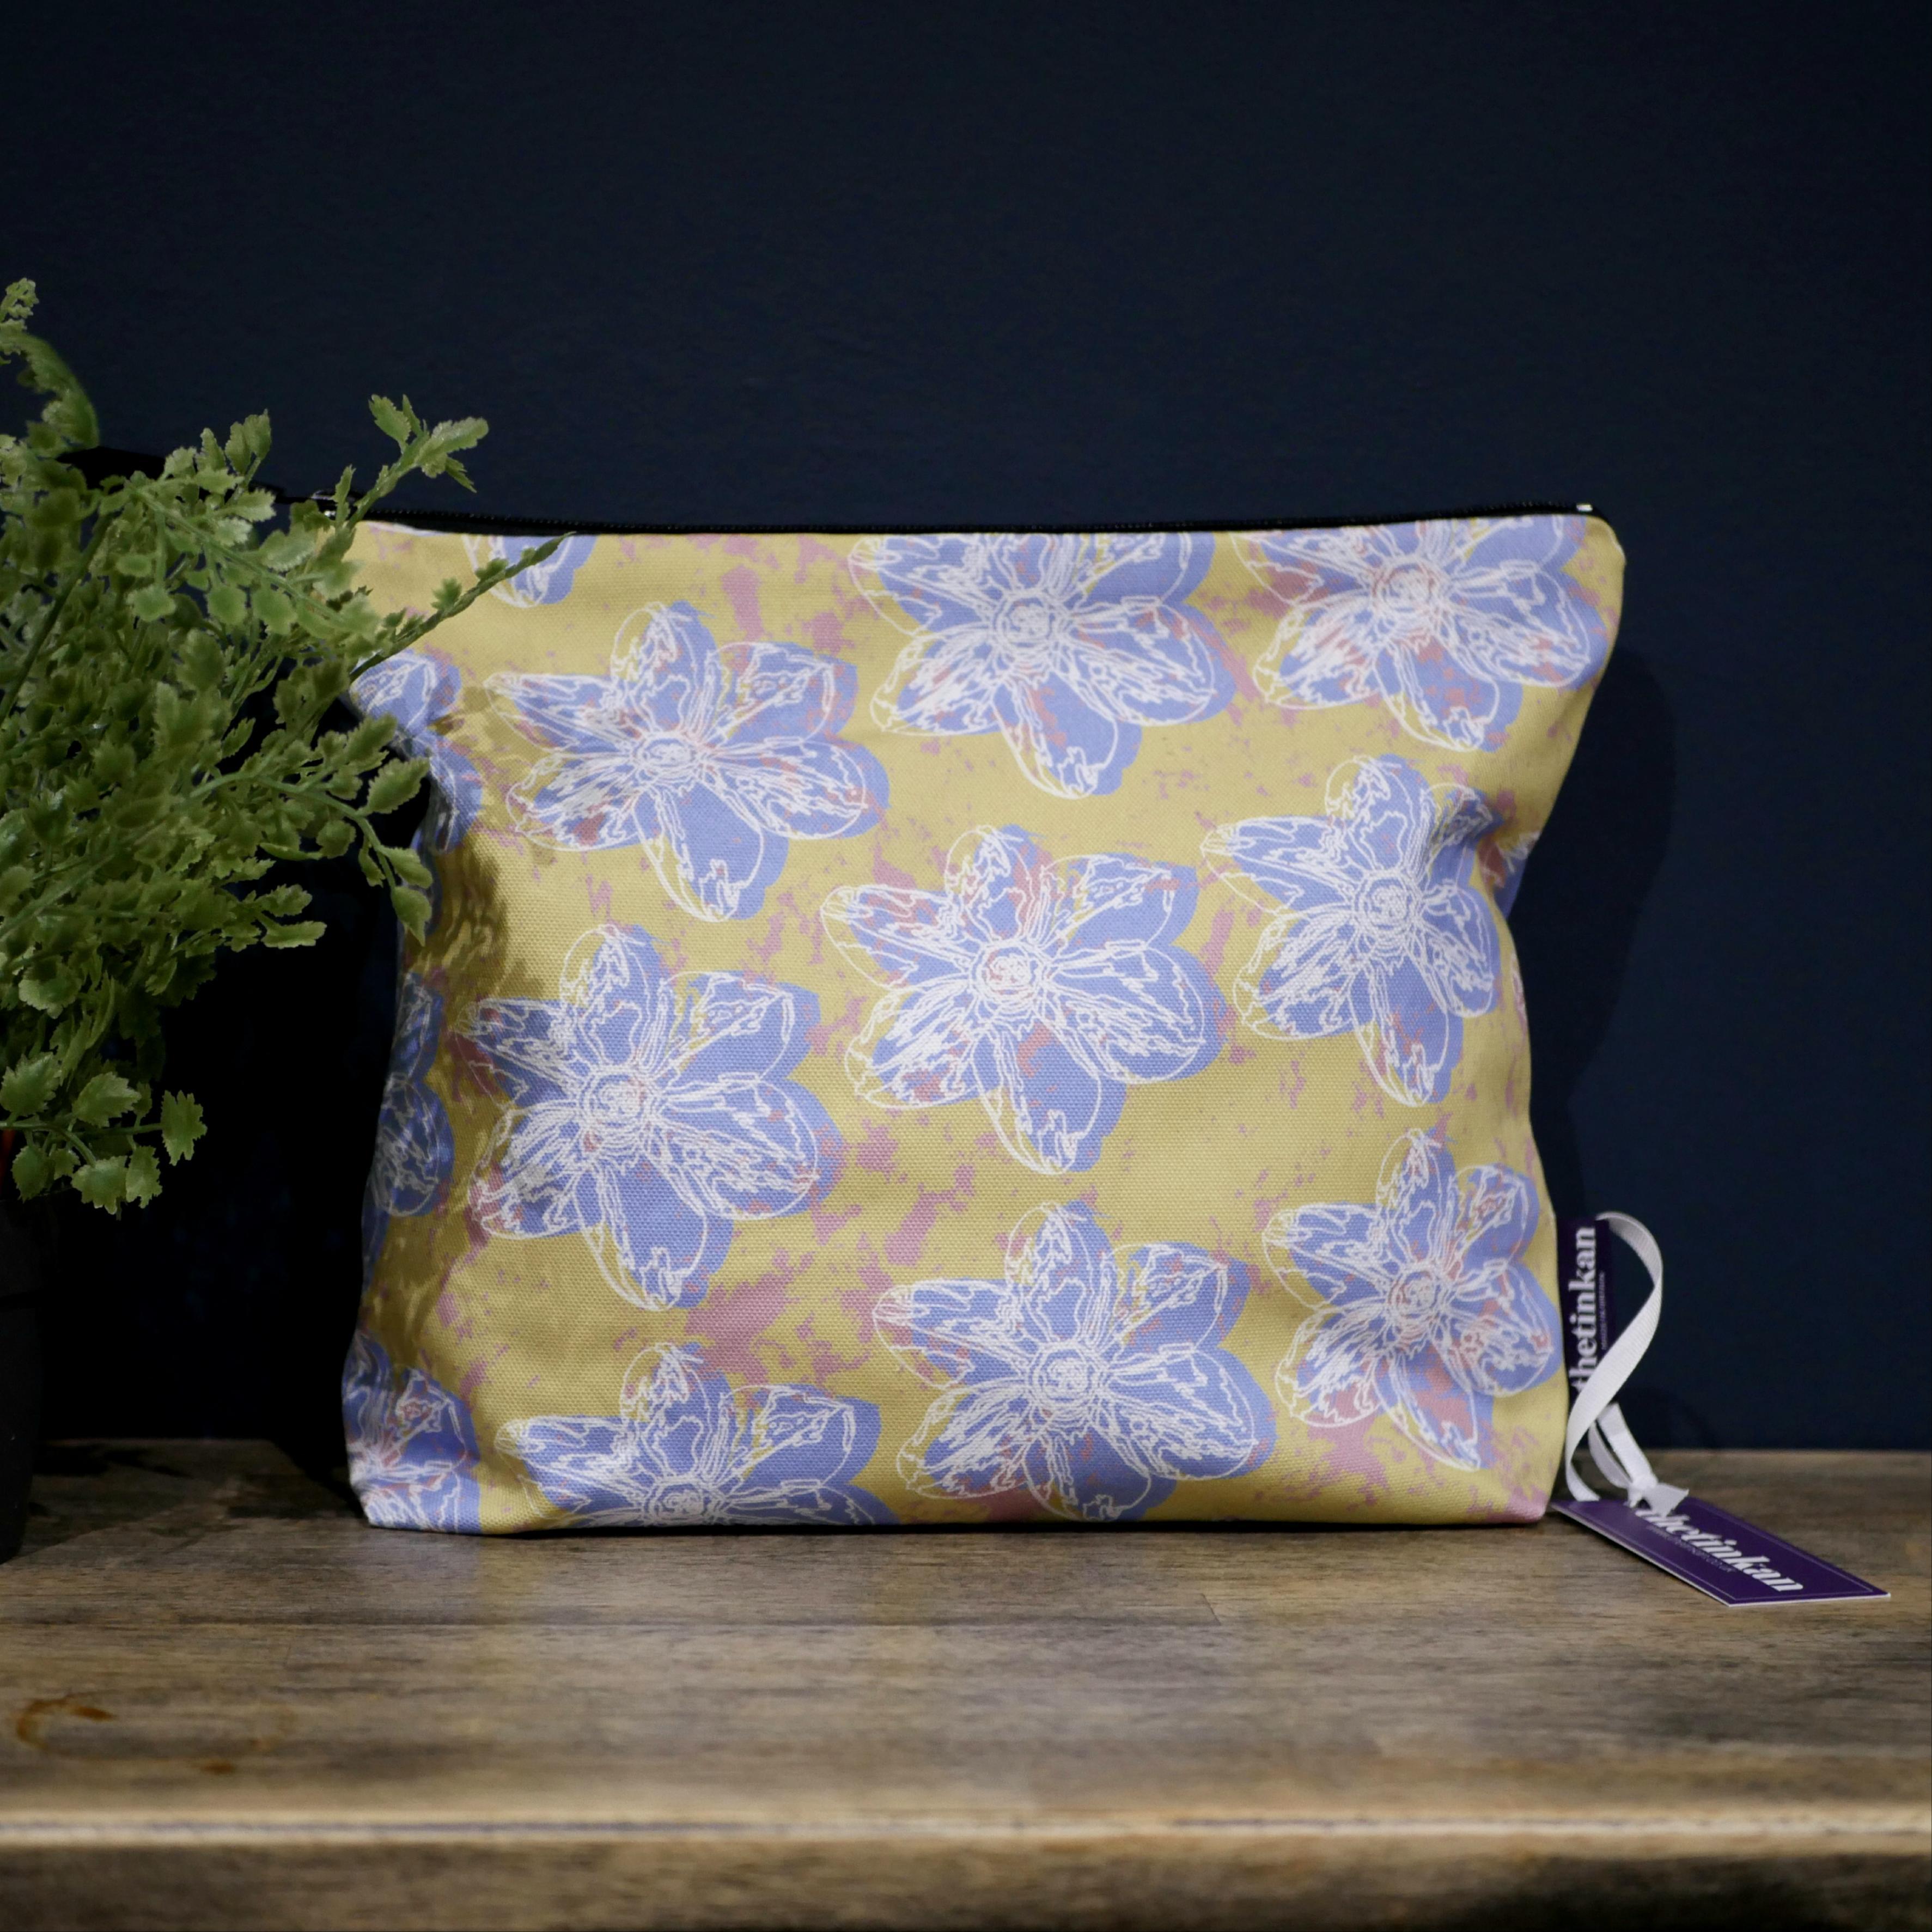 Pale blue flower with a matching coloured reverse, set on an olive green background with a salmon pink colour splash. Designed by thetinkan, the flower splash travel beauty washbag featuring the white traced outline of a?narcissus flower is made from panama cotton with black waterproof lining and matching black sturdy zip. Generously sized for all your travel or home needs.? VIEW PRODUCT >>